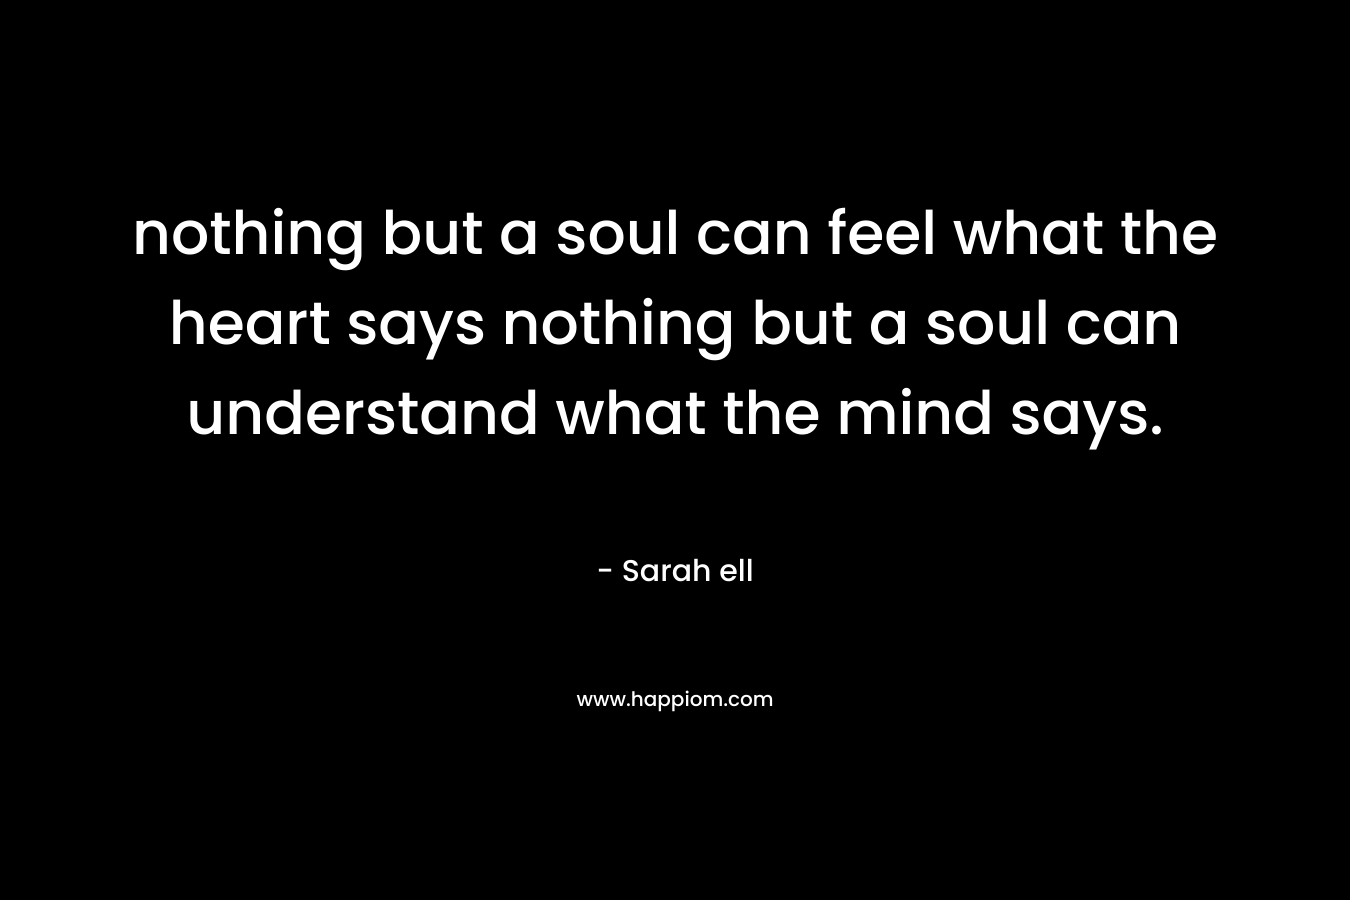 nothing but a soul can feel what the heart says nothing but a soul can understand what the mind says. – Sarah ell